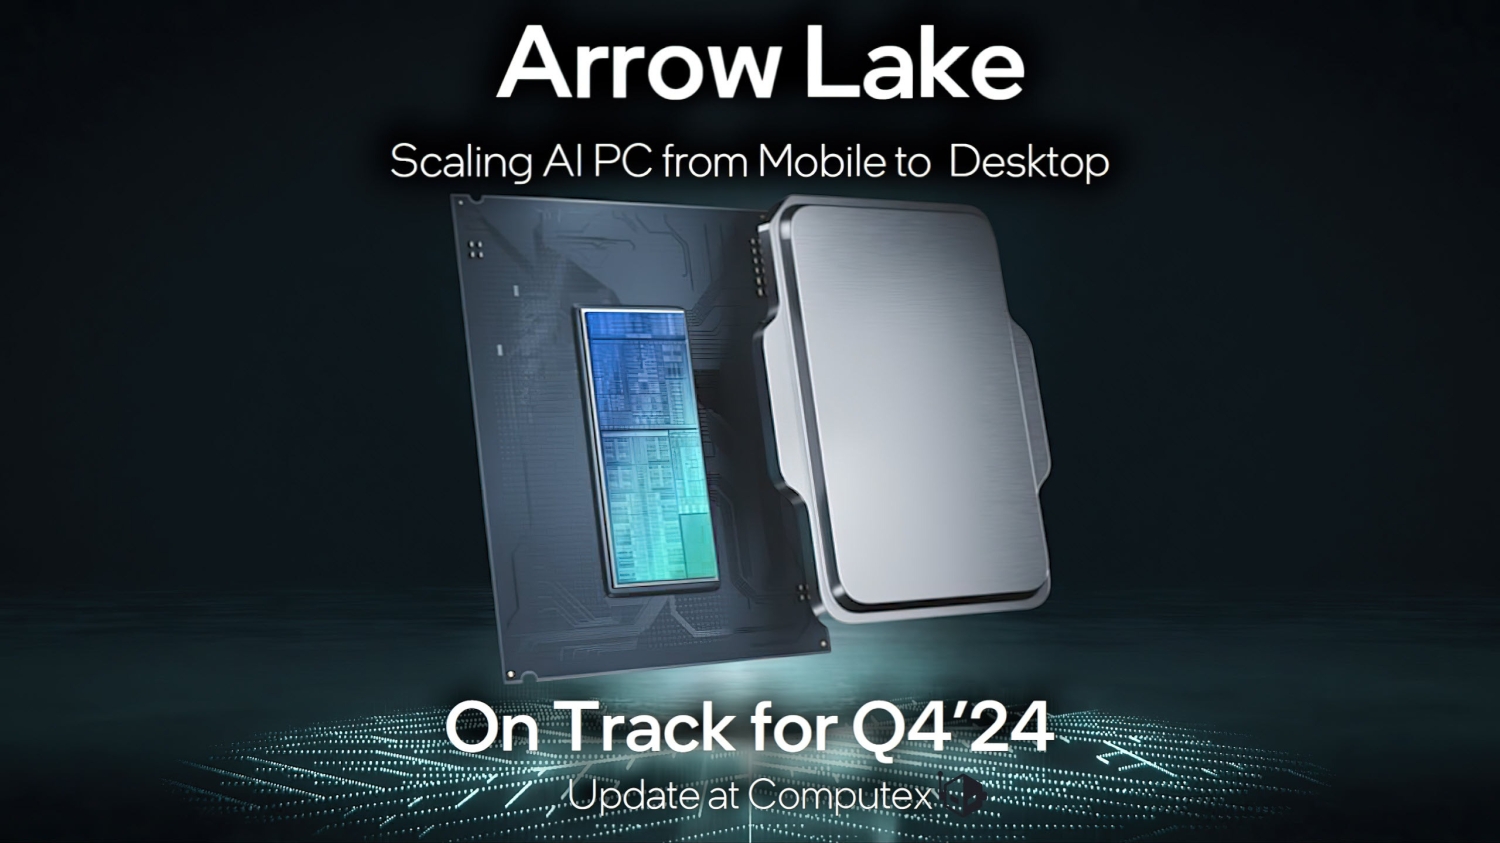 Intel’s new 800 platform for Core Ultra 200 “Arrow Lake” CPUs detailed in new leaks